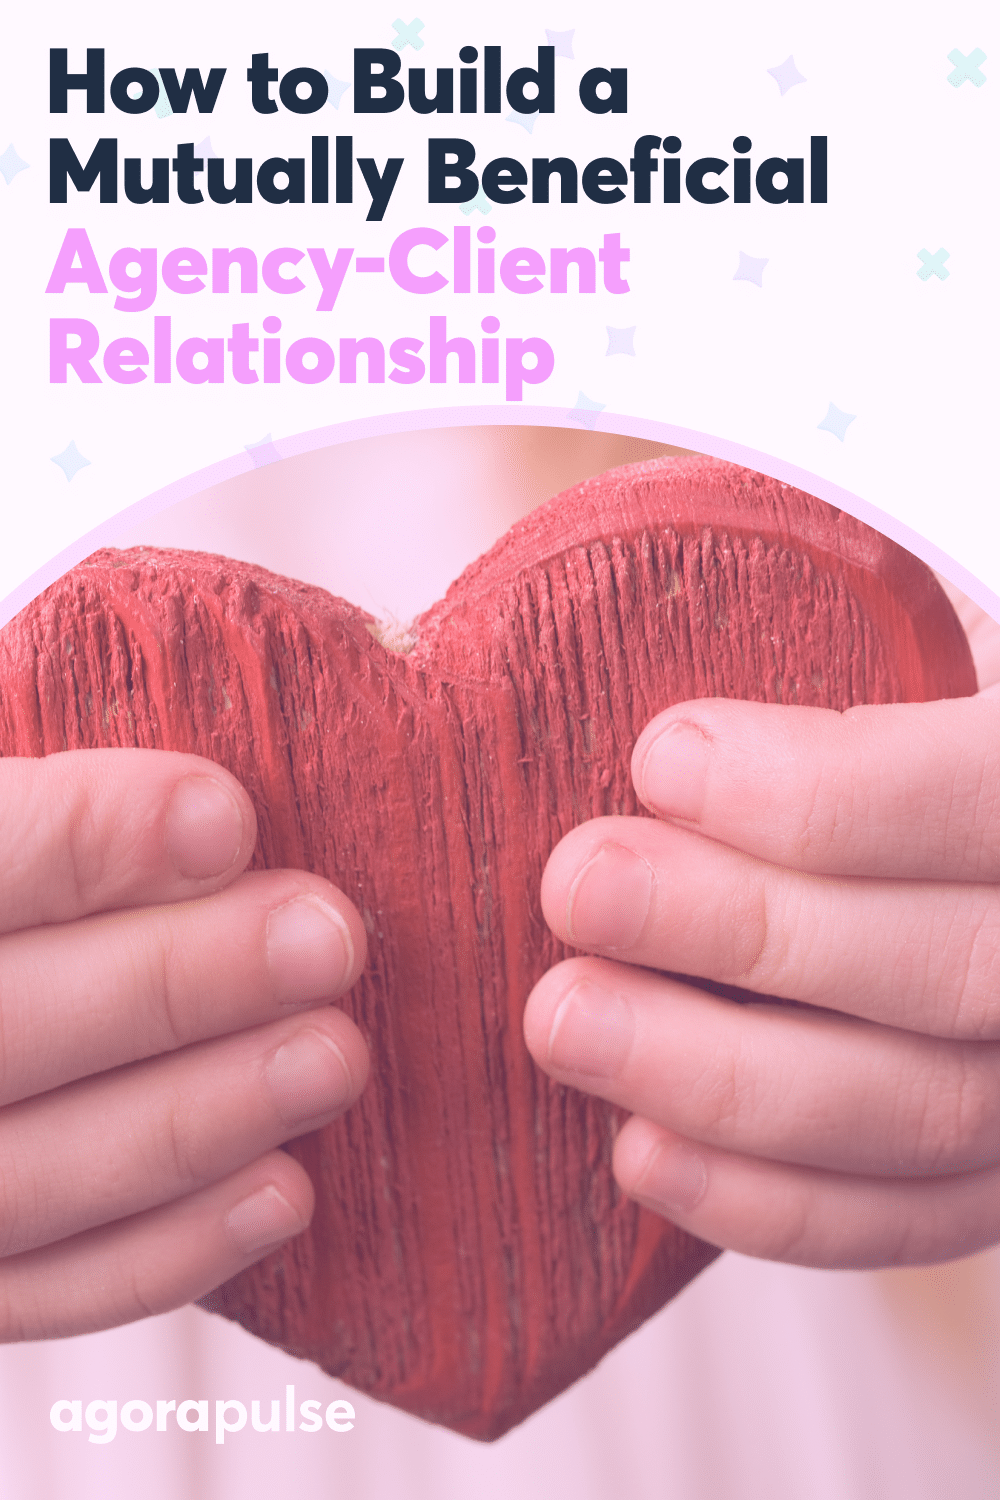 5 Simple Tips to Build a Successful Agency Client Relationship